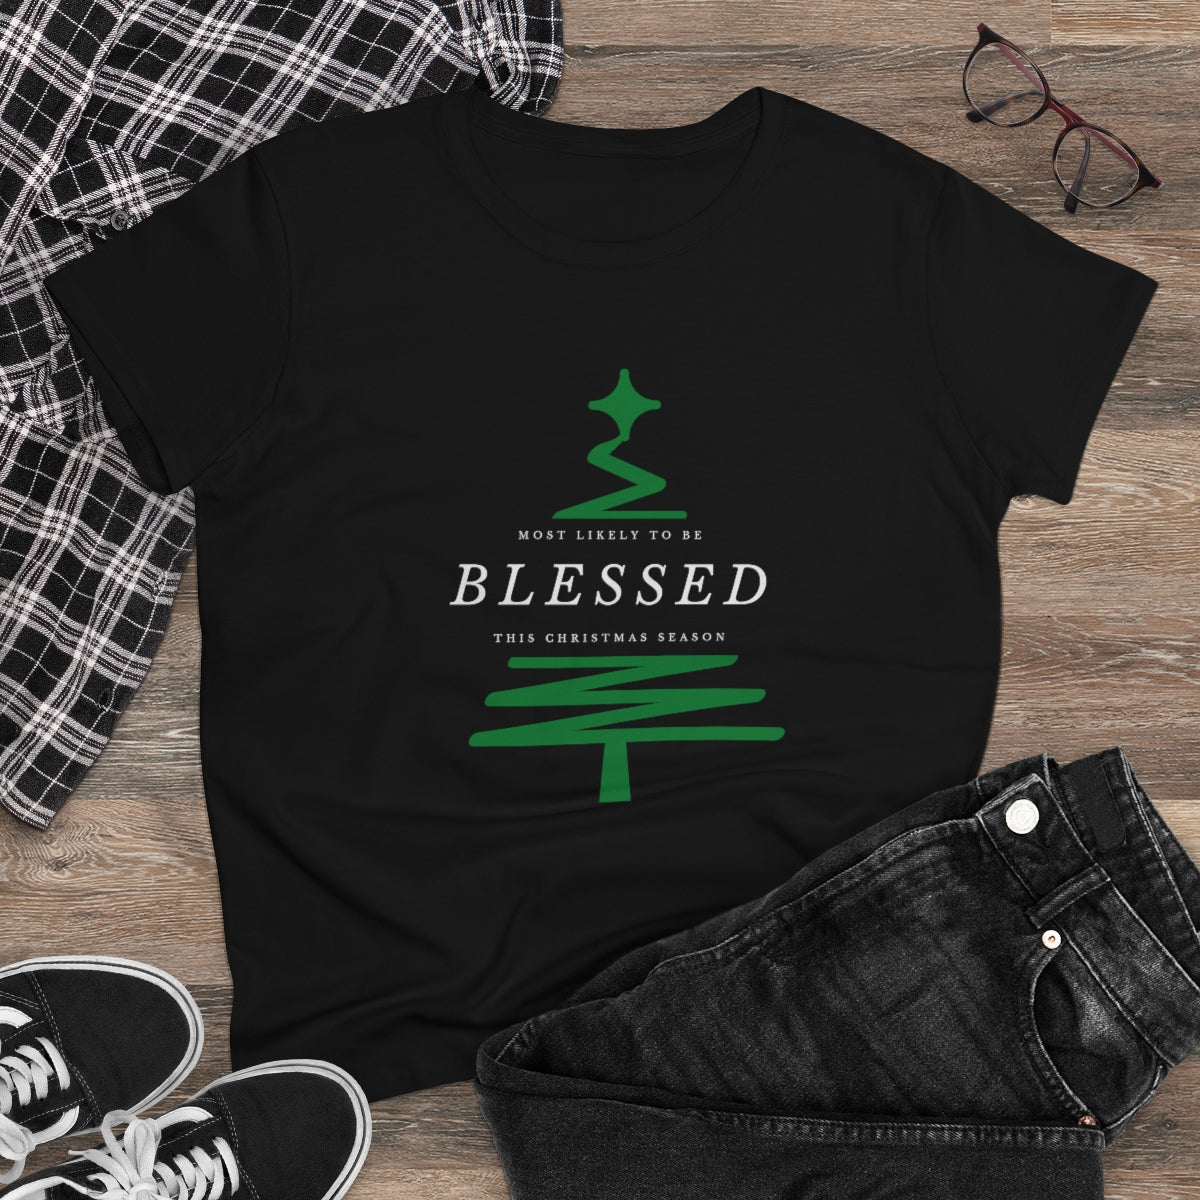 Most Likely to Be Blessed - Christmas Tee